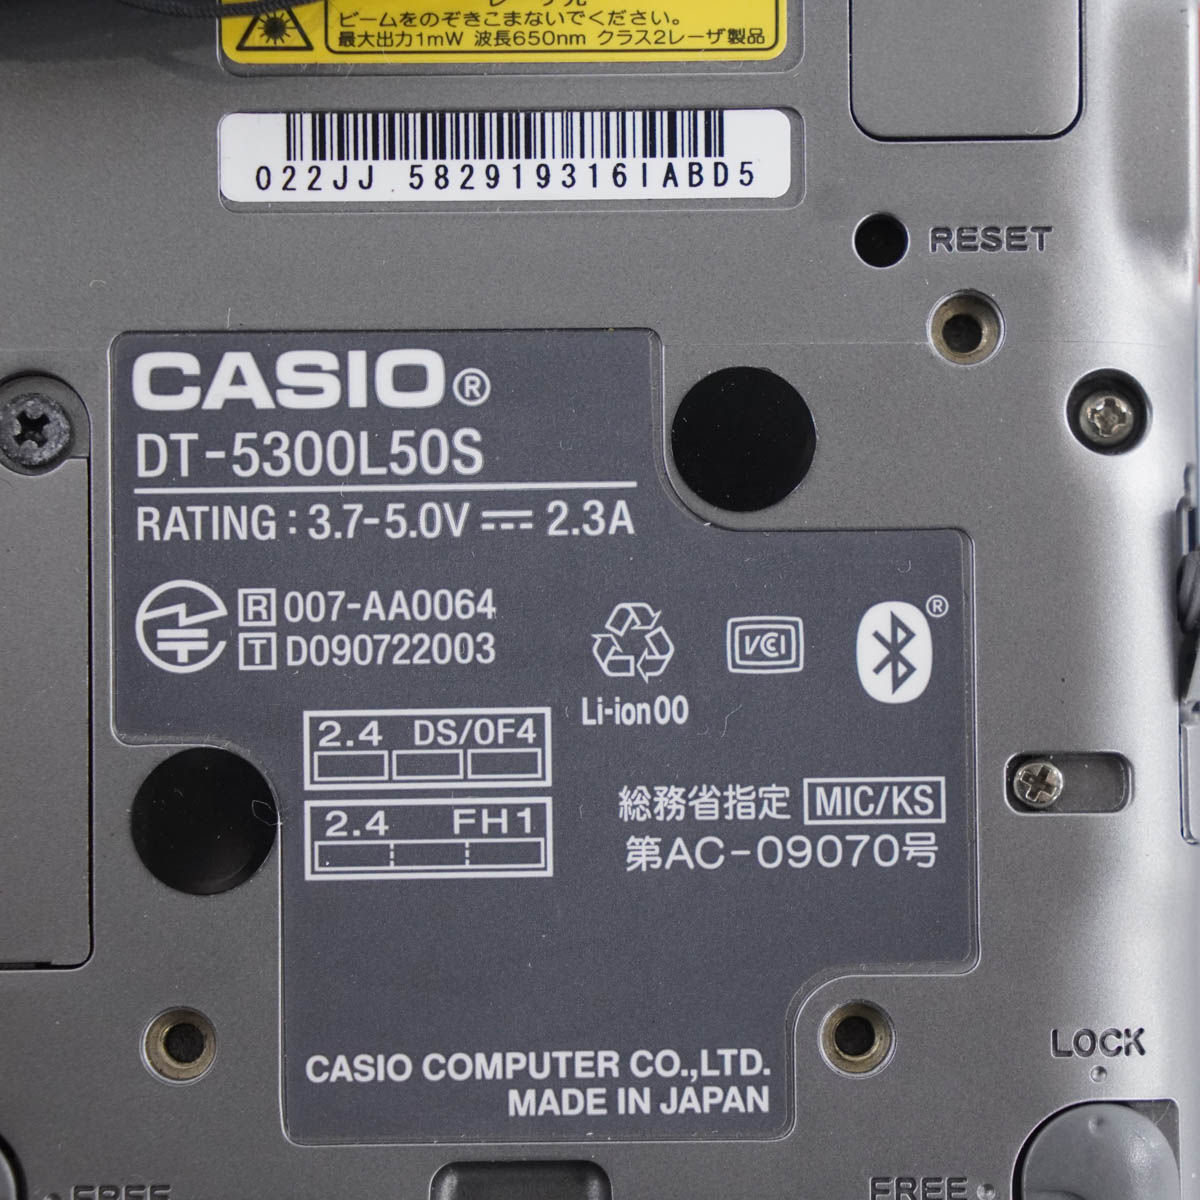 PG]USED 8日保証 7台セット CASIO DT-5300L50S ハンディターミナル